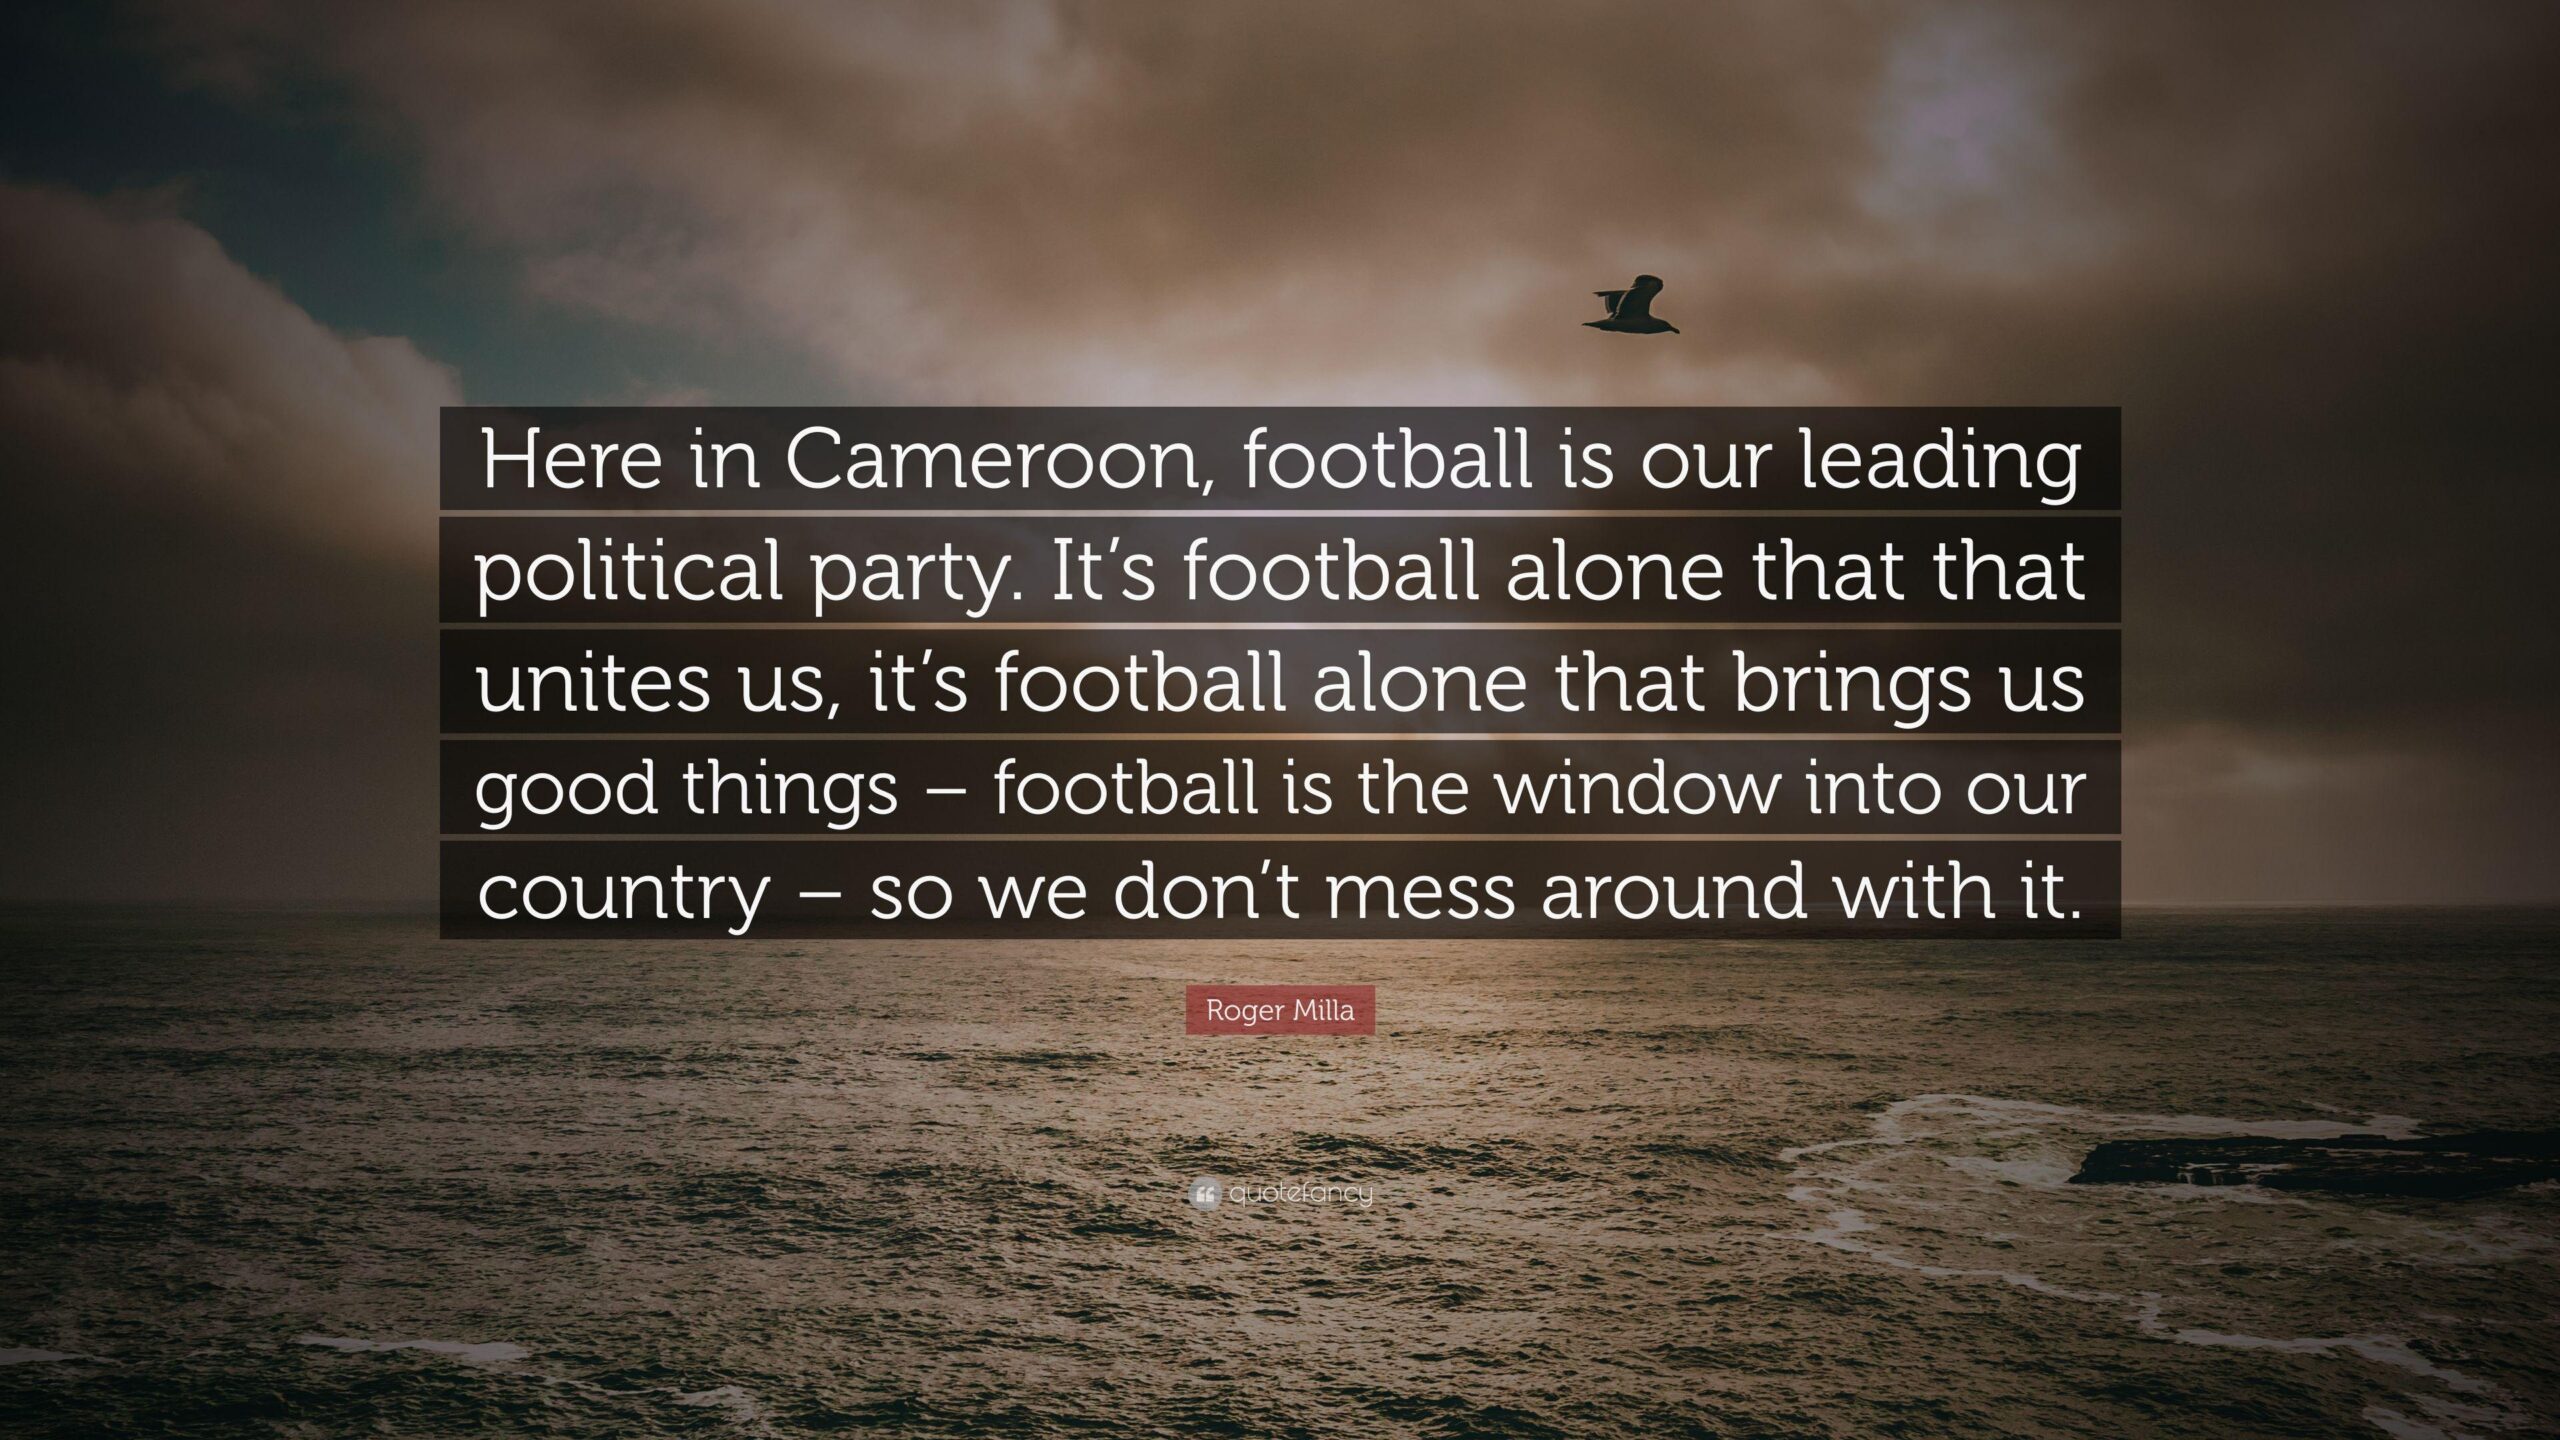 Roger Milla Quote “Here in Cameroon, football is our leading